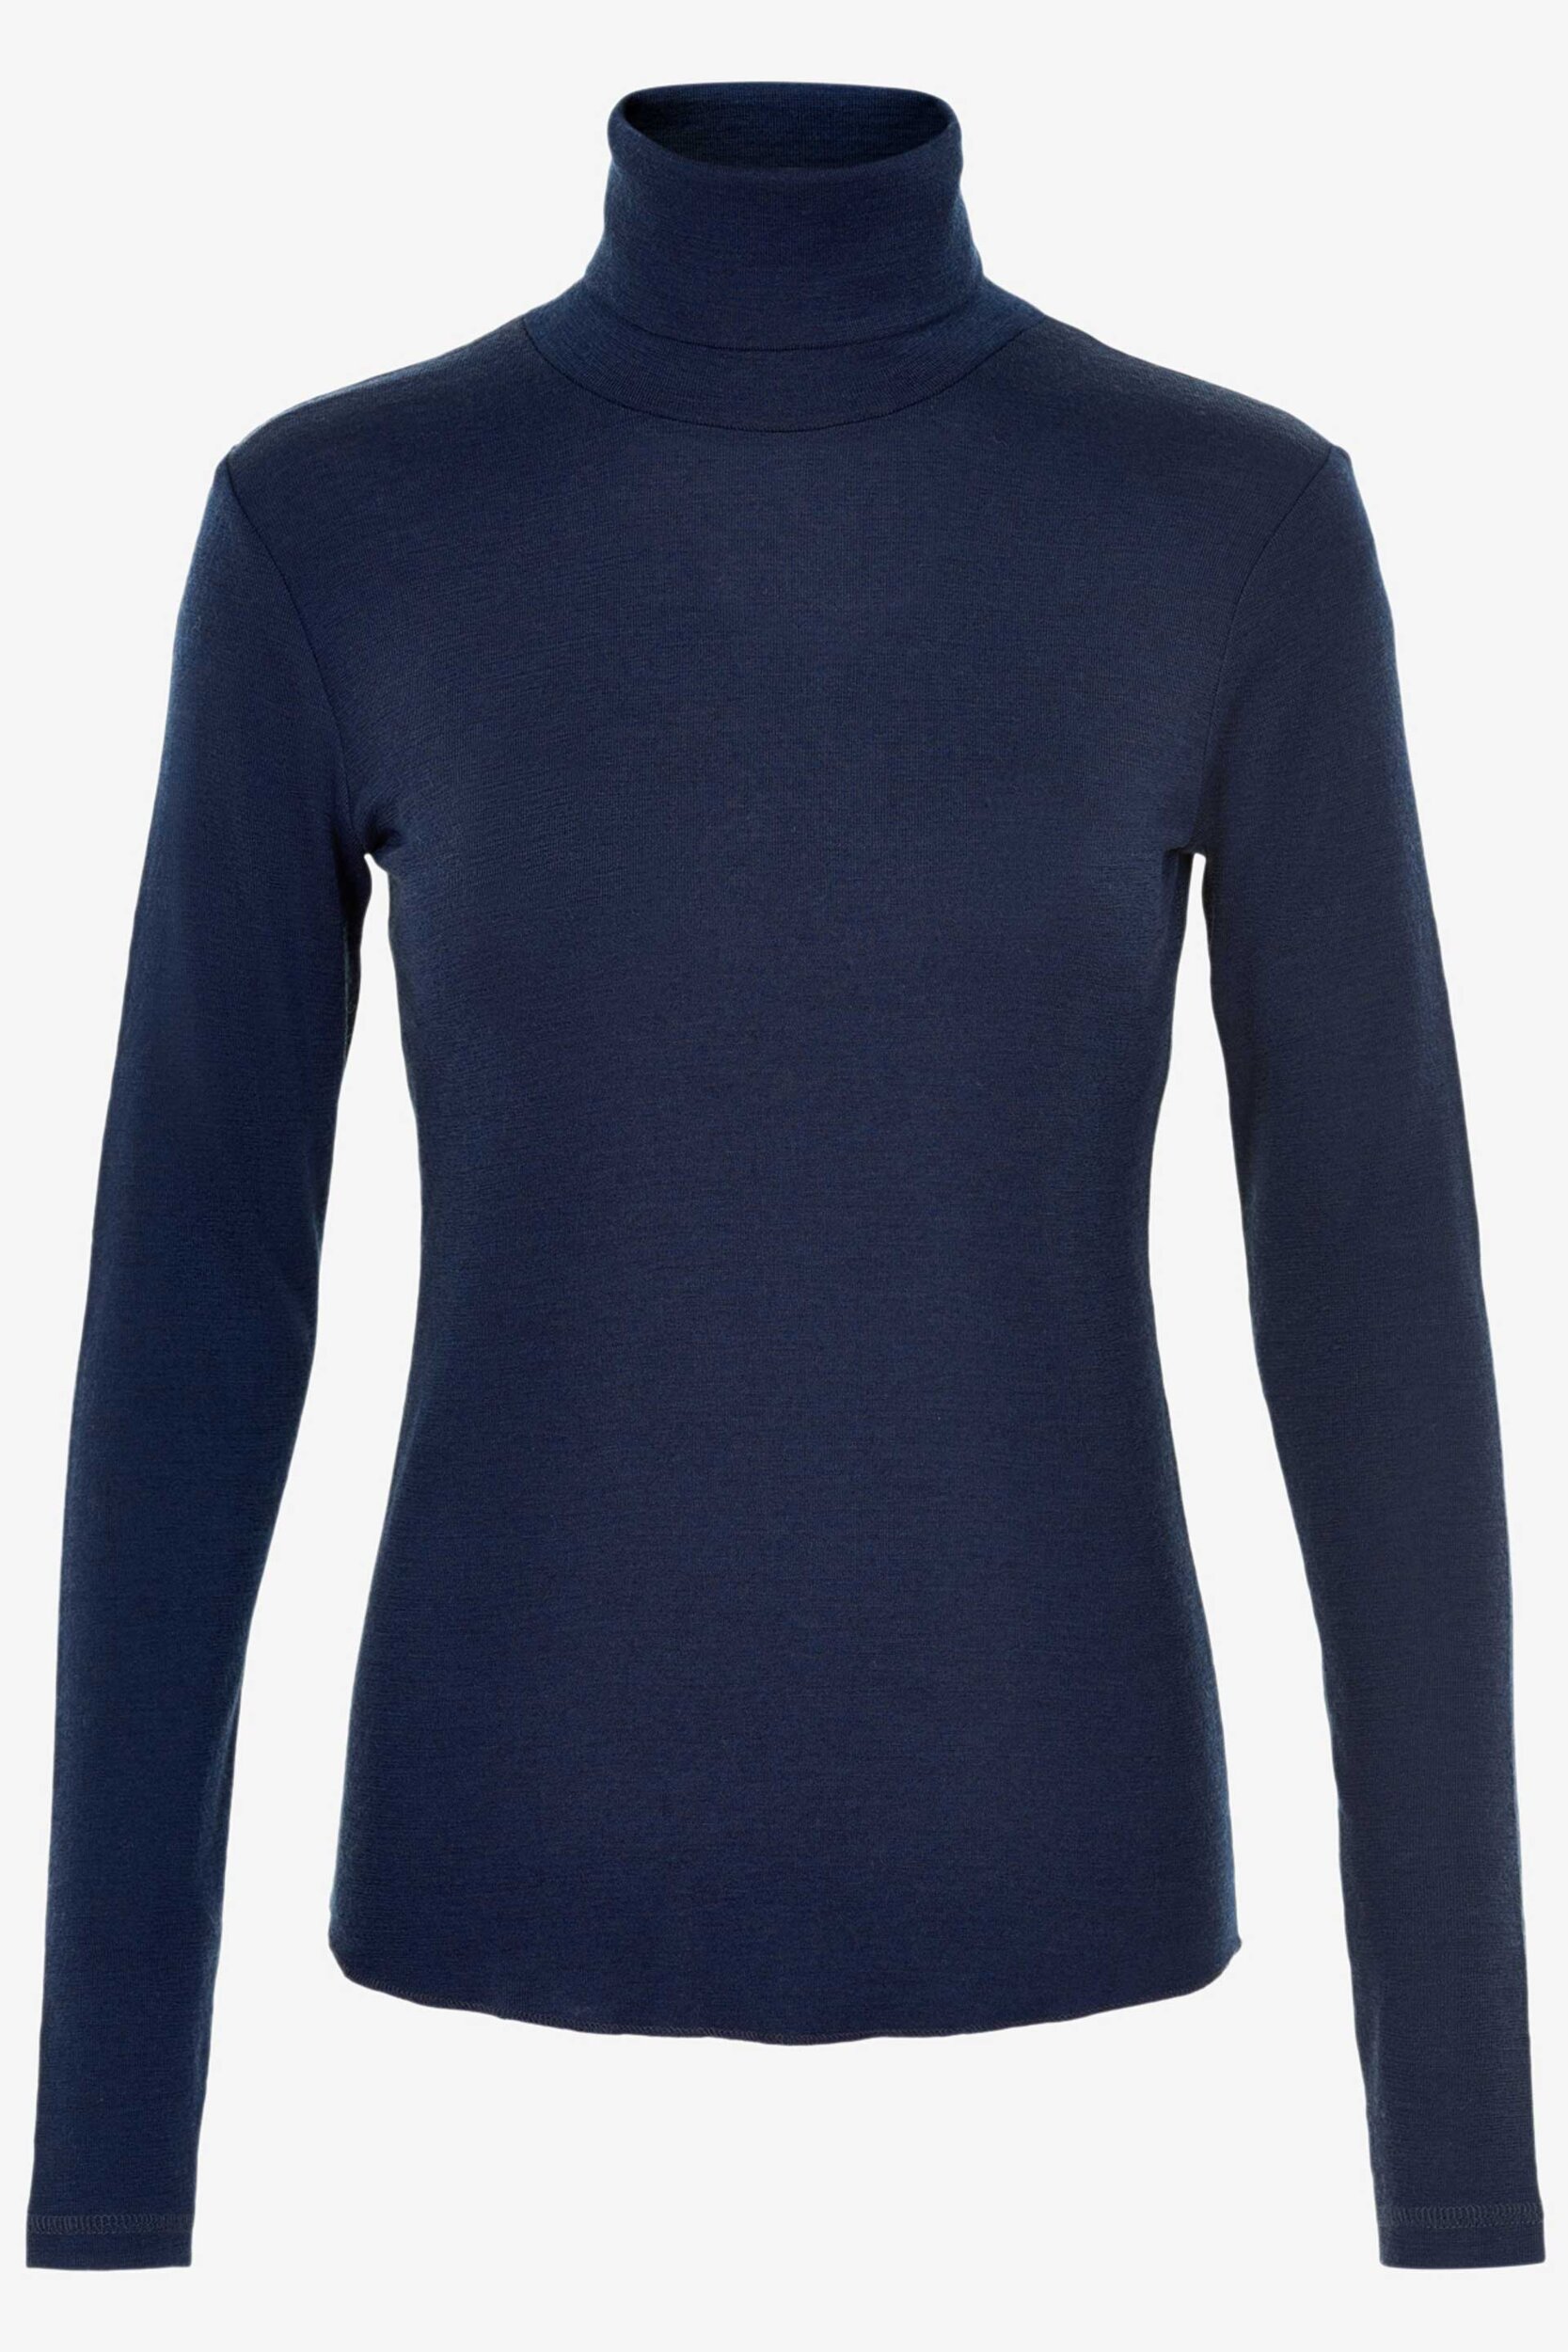 Wendy Sweater Night Sky Perfect classic rollneck - front image